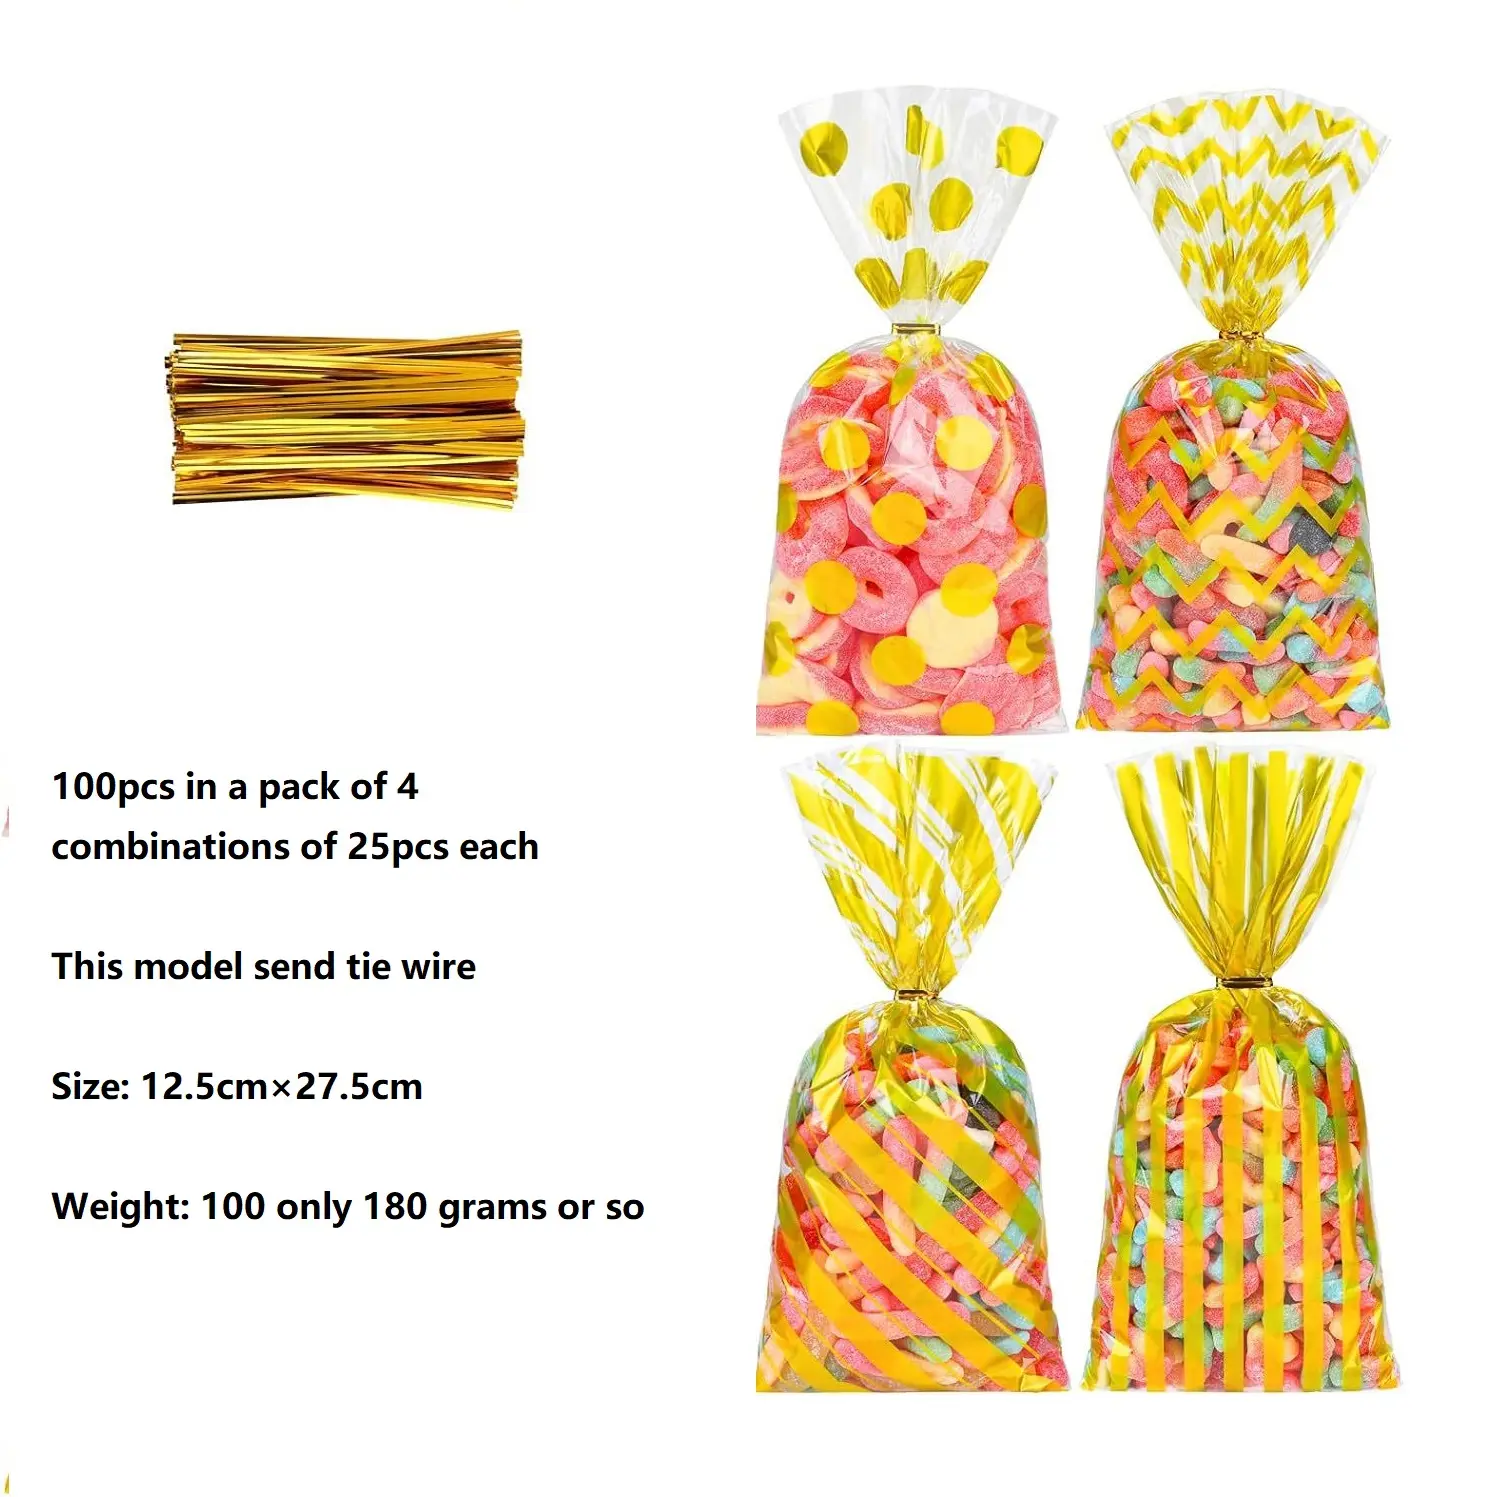 Wholesale Transparent OPP Plastic Gold Striped Polka Dot Pattern Gift Bags Promotional Packaging for Cookies Pastries Candies